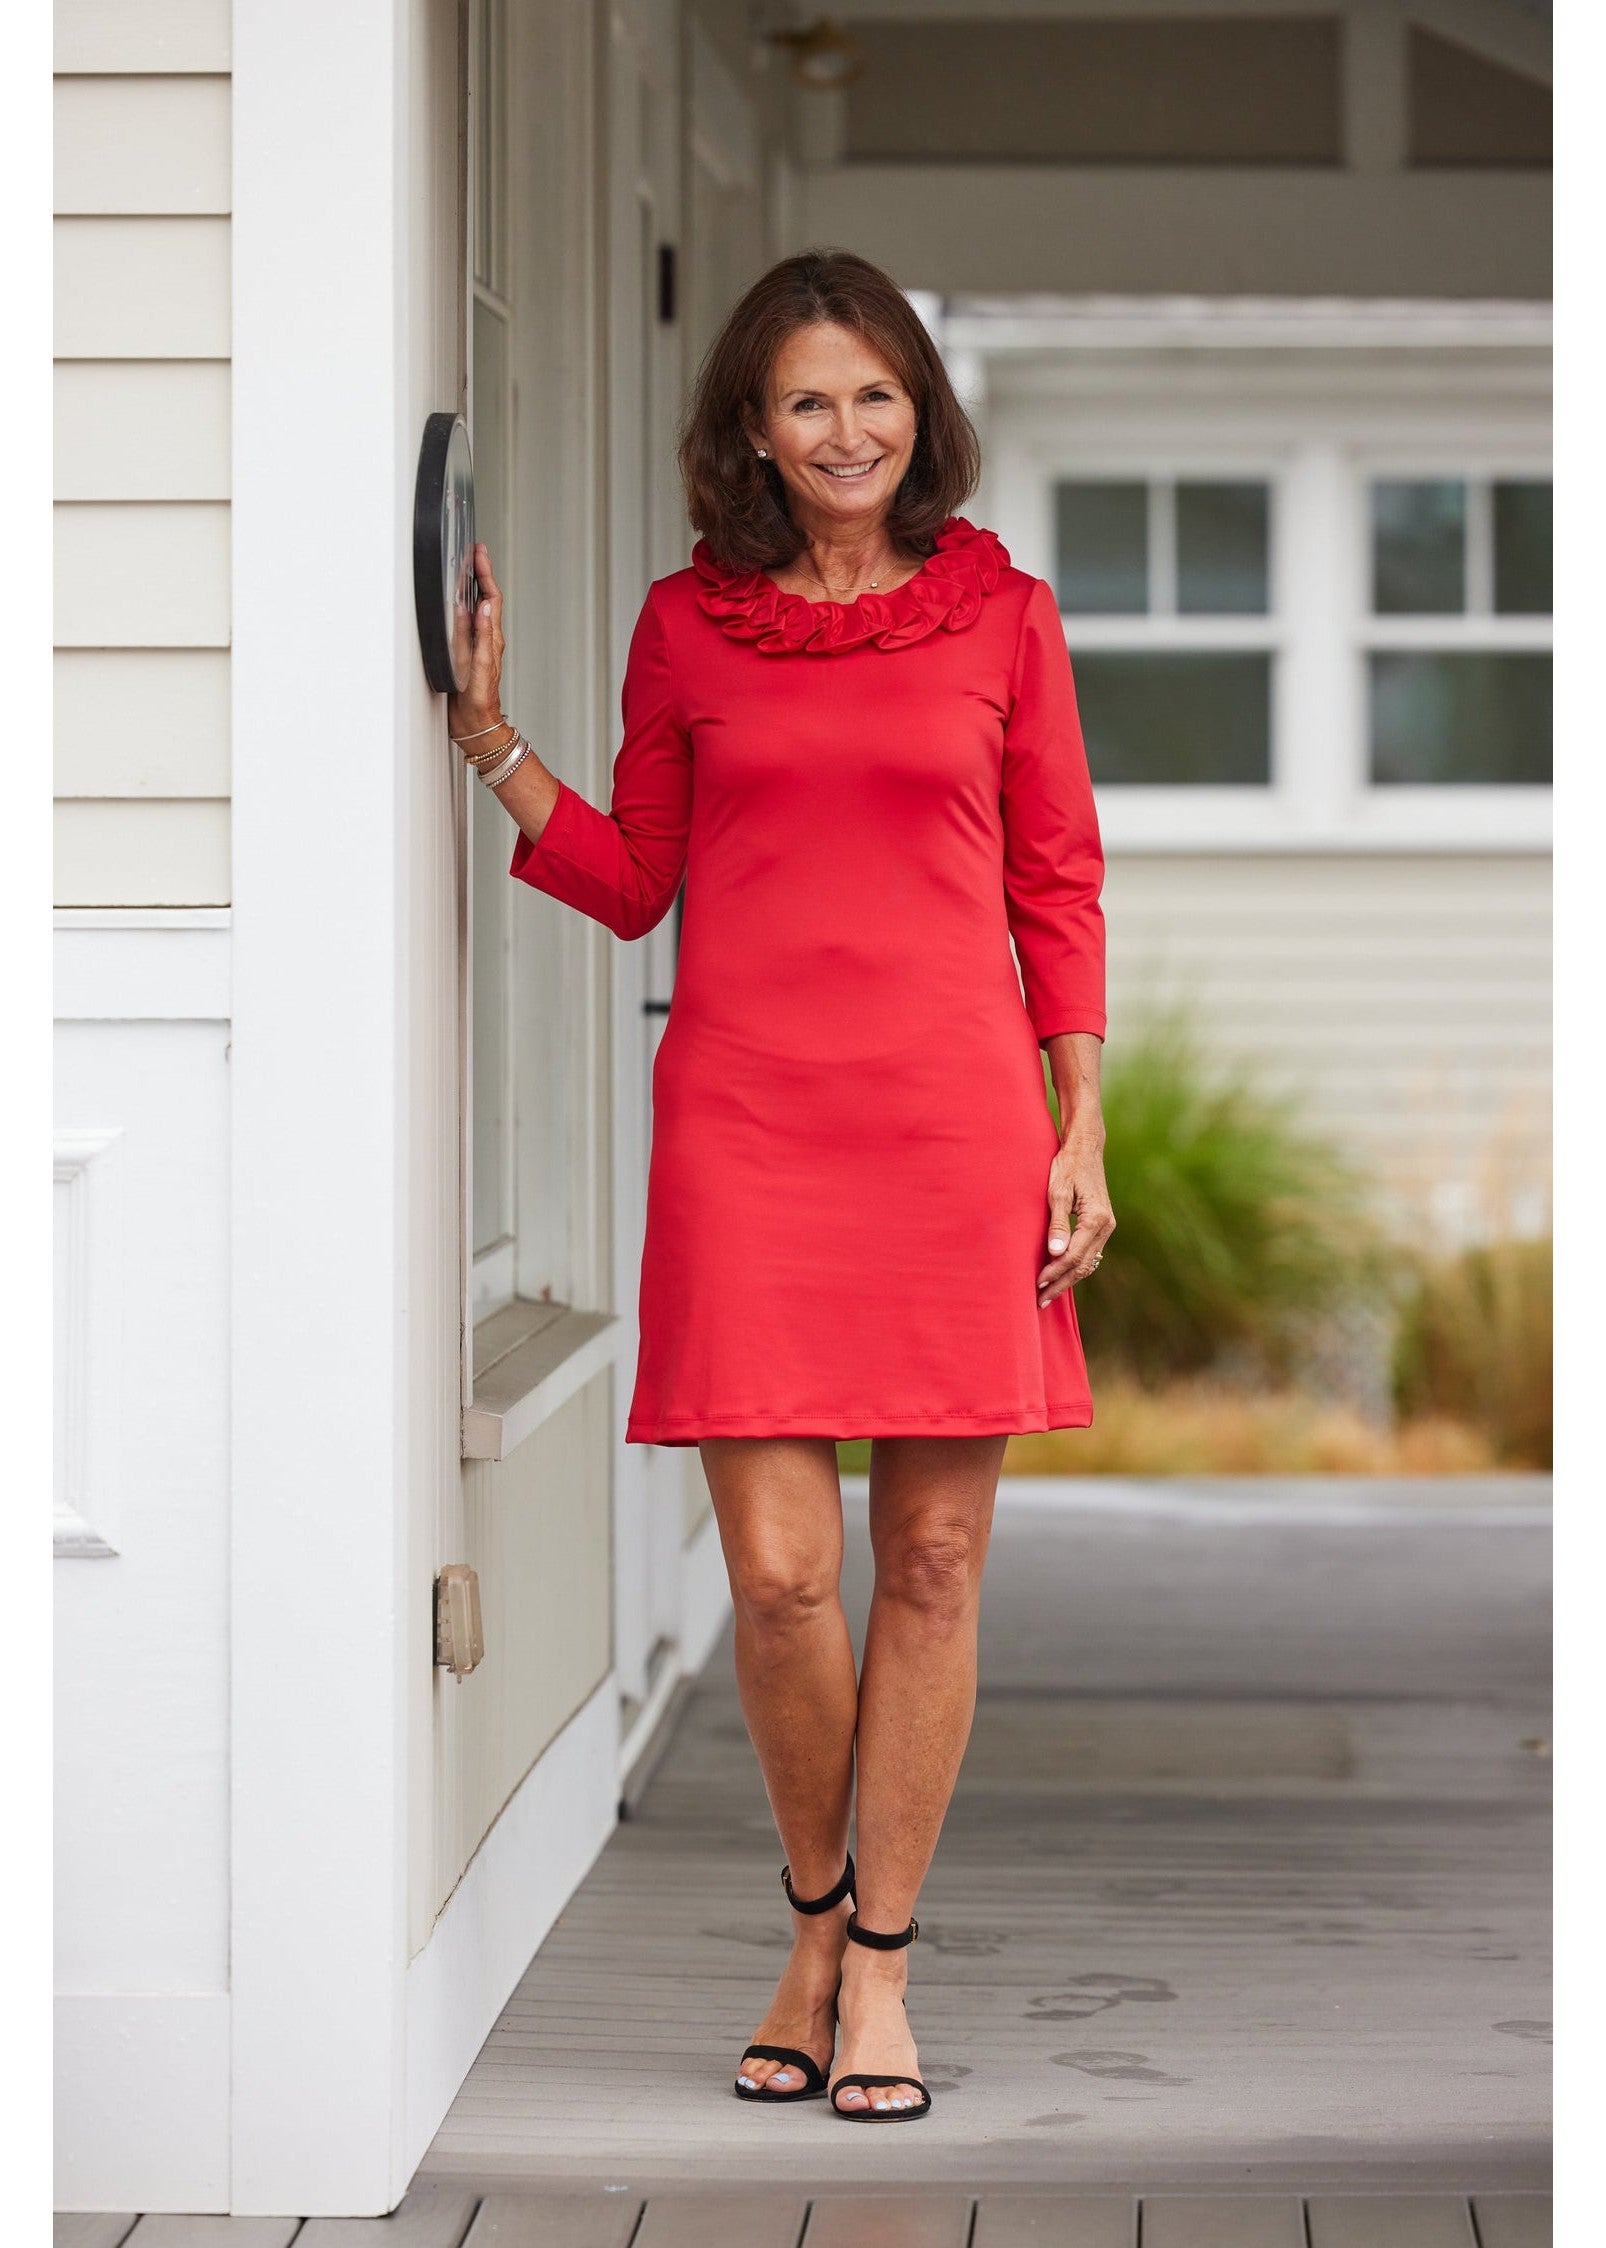 Cricket Dress 3/4- Solid Red- FINAL SALE